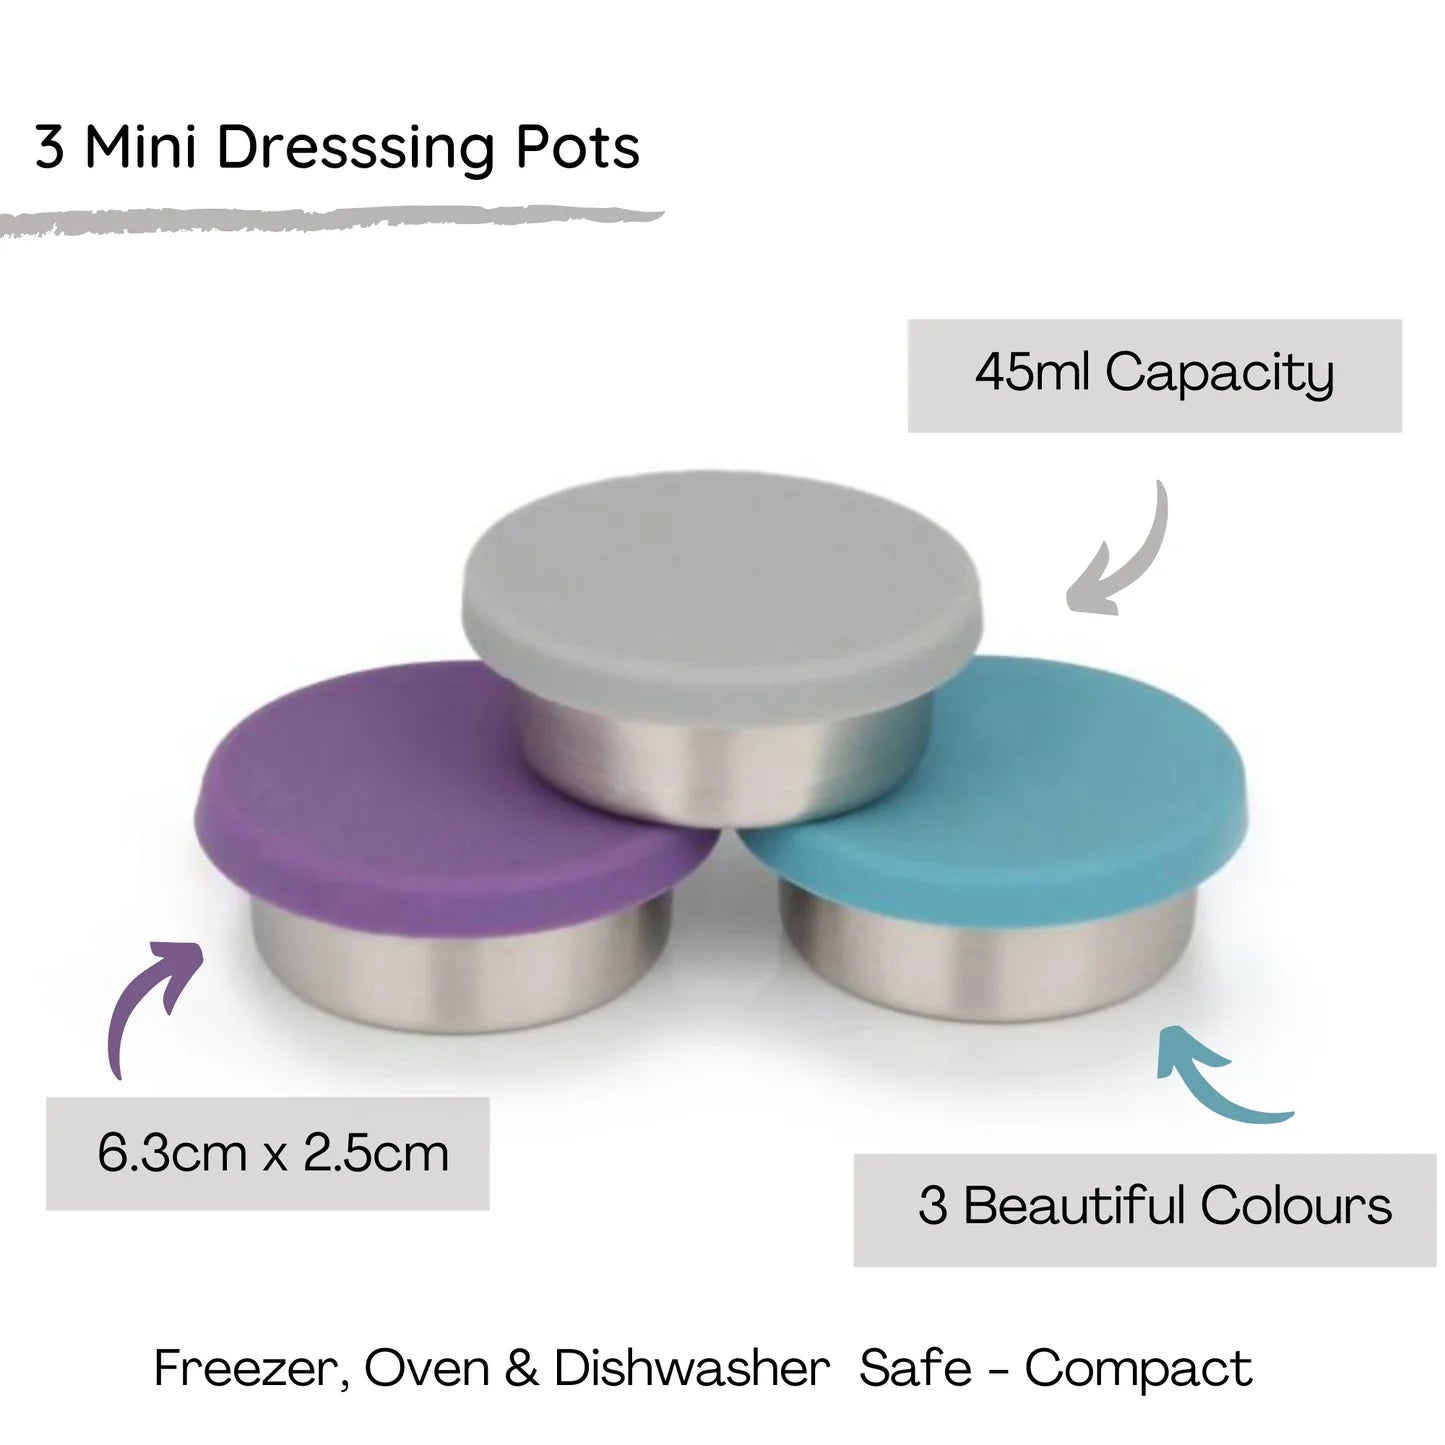 Mini Stainless Steel Dressing Pots- Leakproof Set of 3